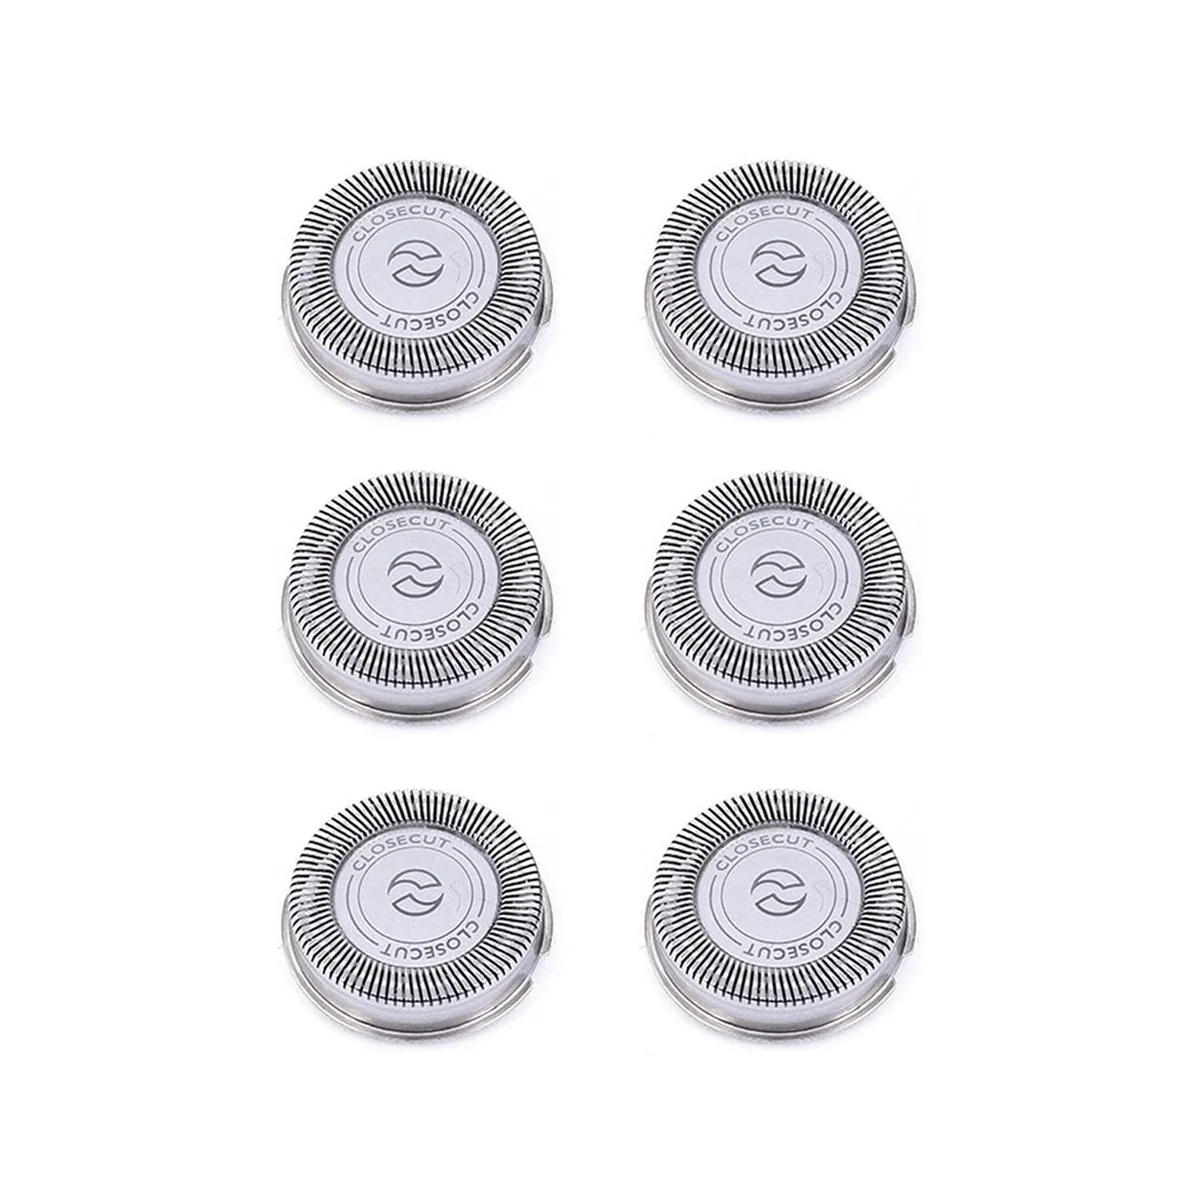 

6Pack SH30 Replacement Heads for Philips Norelco Shaver Series 3000, 2000, 1000 and S738, with Durable Sharp Blades